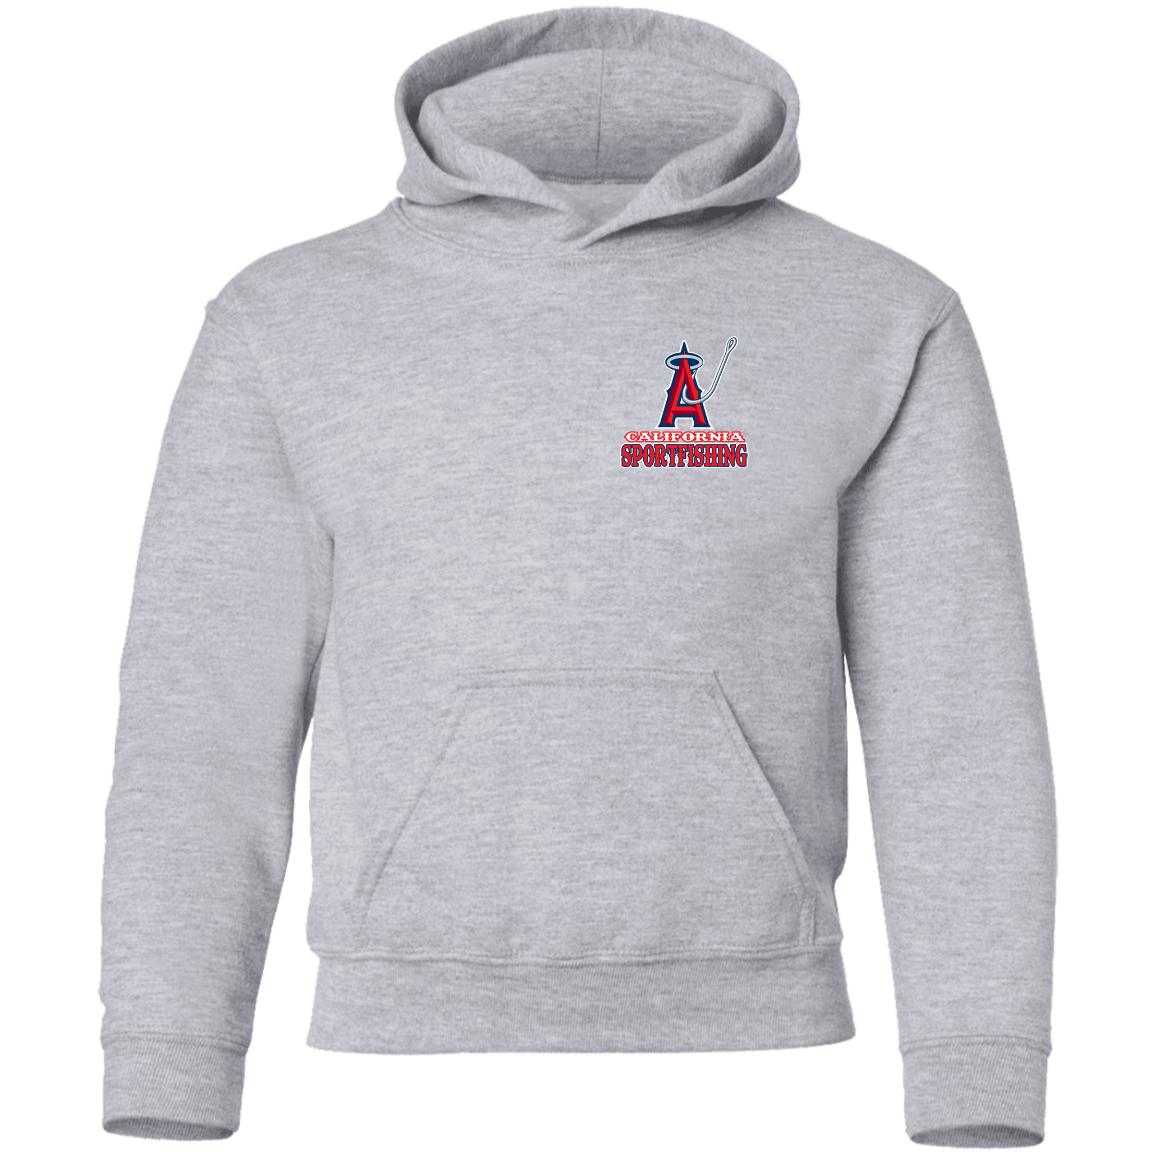 ArtichokeUSA Custom Design. Anglers. Southern California Sports Fishing. Los Angeles Angels Parody. Youth Pullover Hoodie